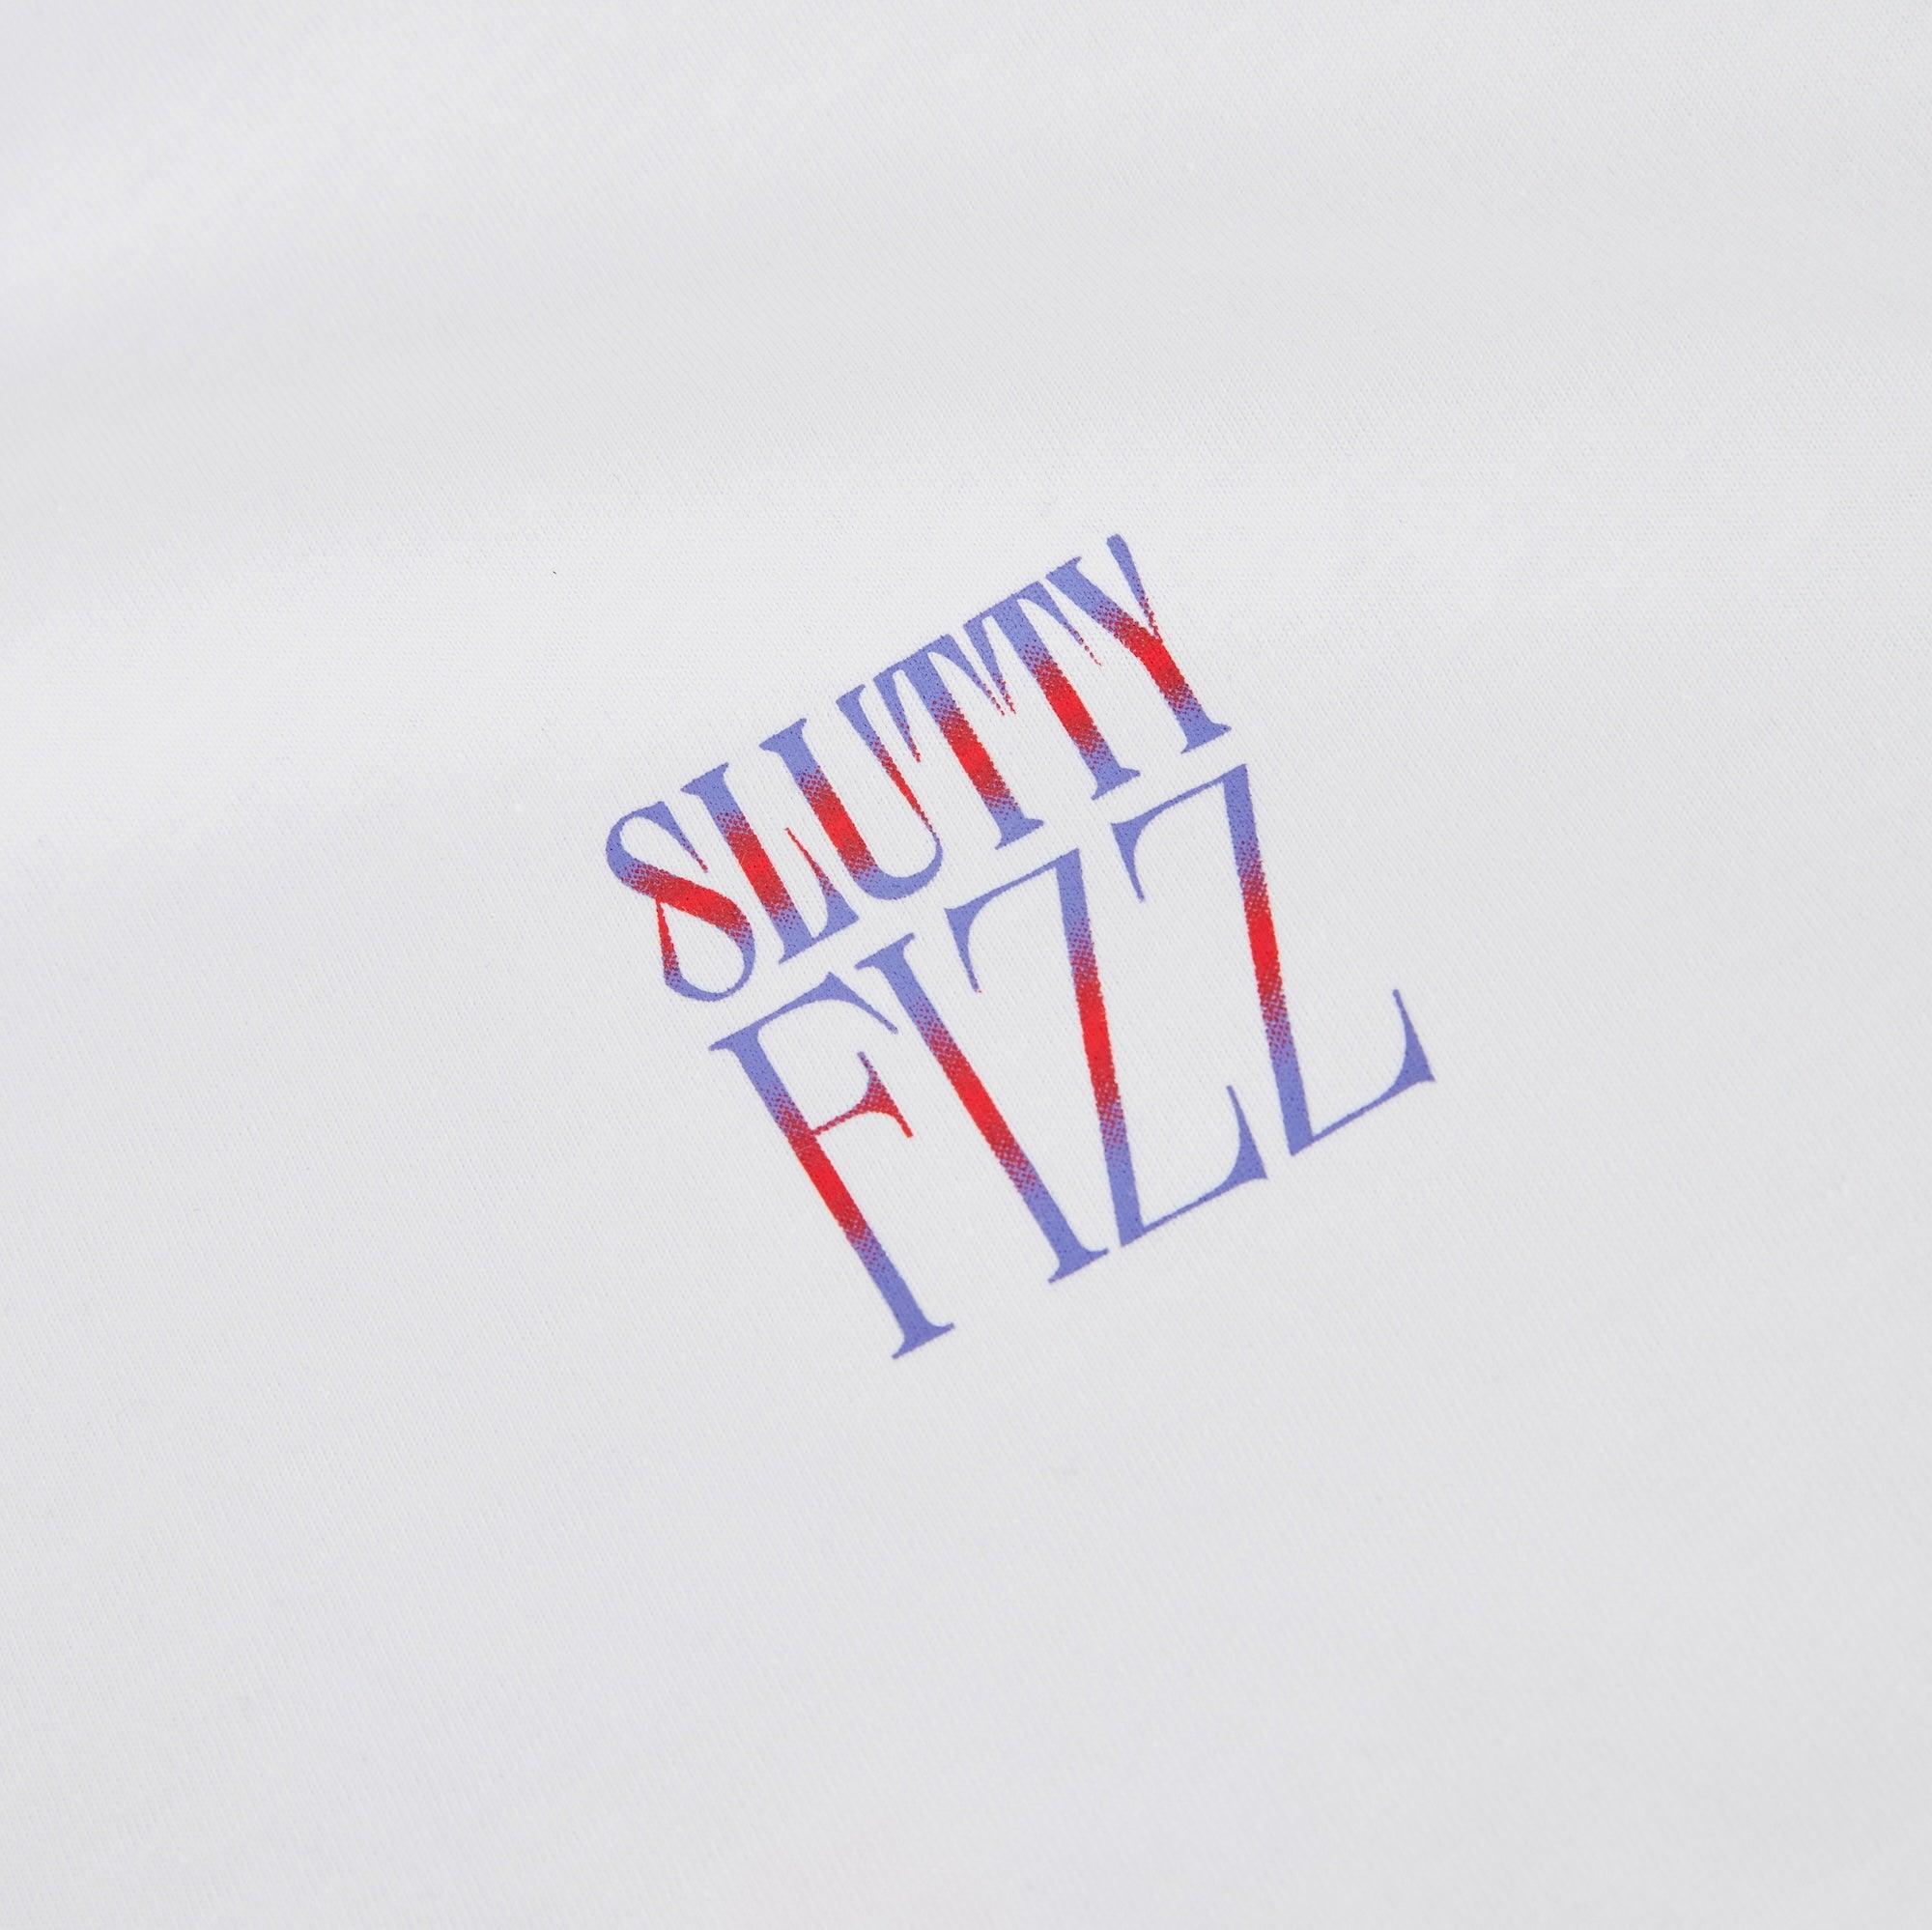 Slutty Fizz T-Shirt - SOON TO BE ANNOUNCED